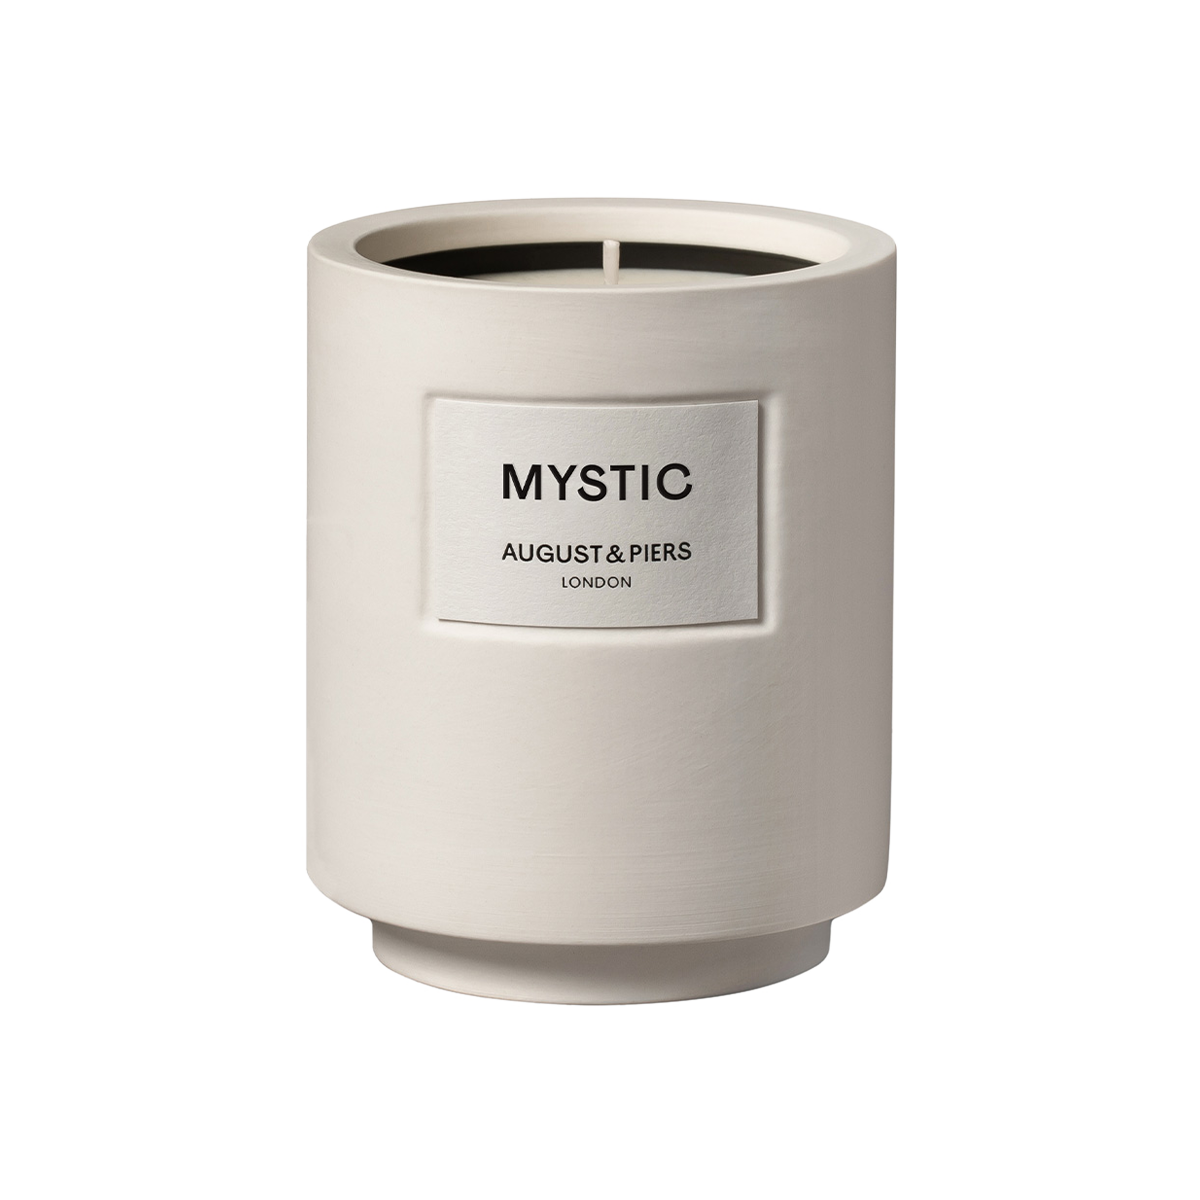 AUGUST&PIERS - Mystic Scented Candle